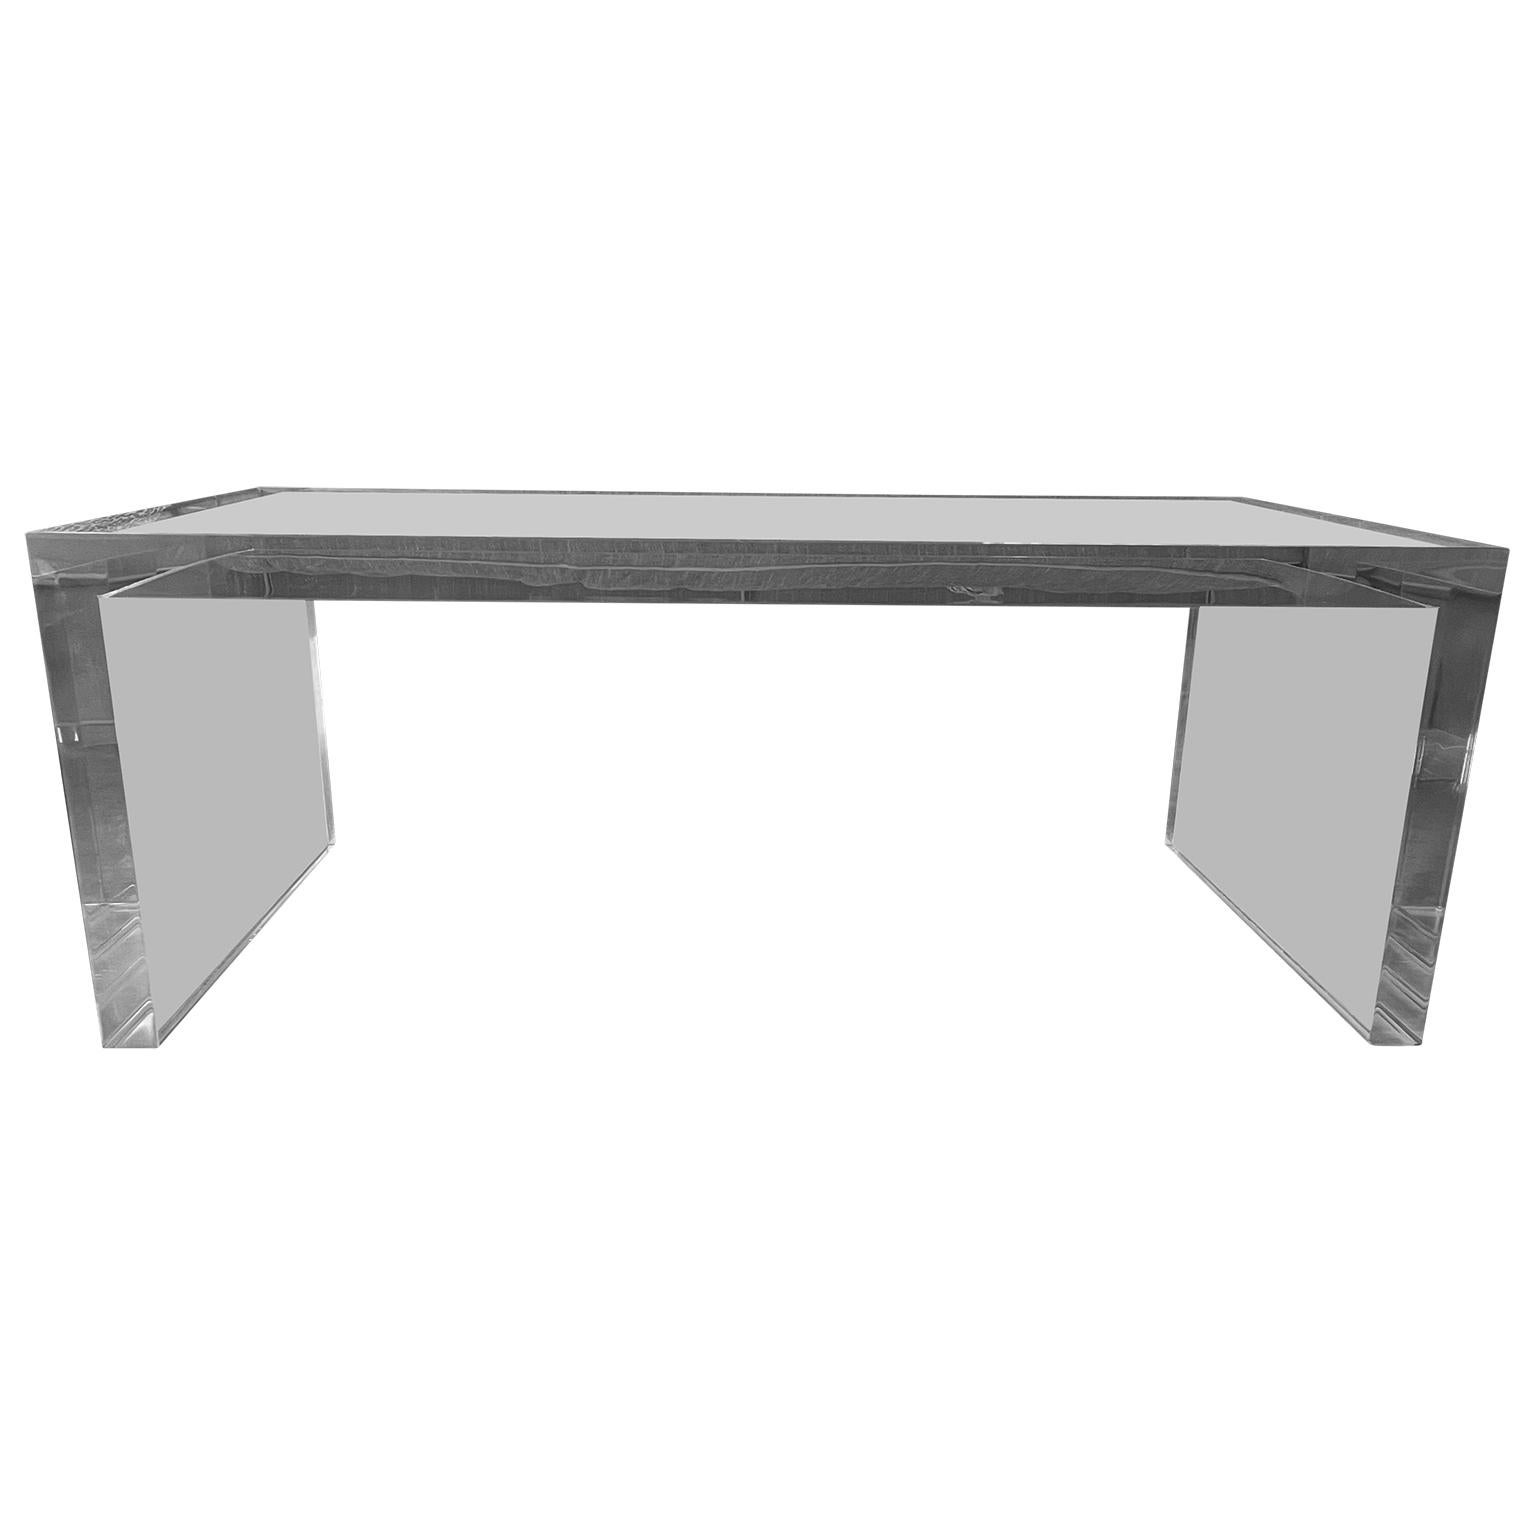 Two inch thick rectangular lucite cocktail table from the early 1980's
This outstanding coffee table is solid and constructed in 2